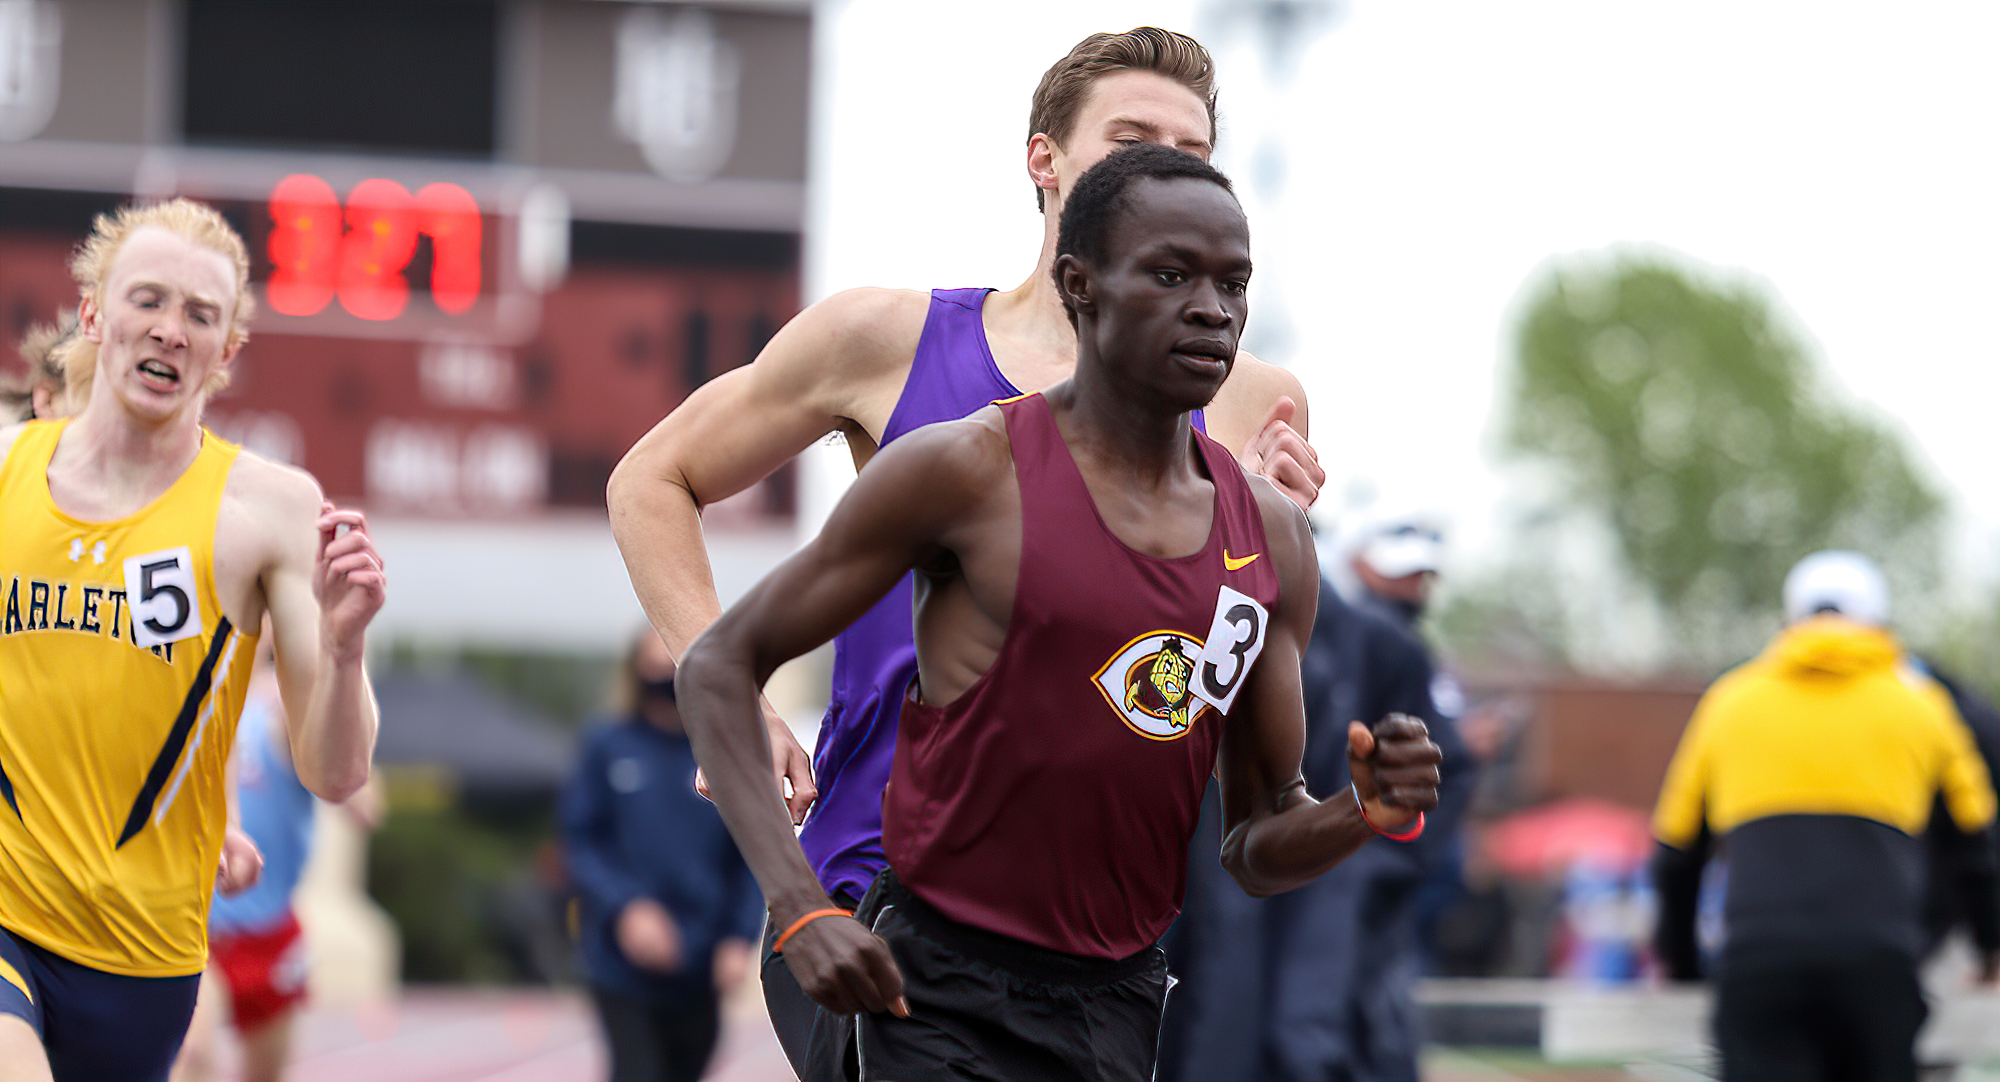 Munir Isahak broke the 42-year-old record in the 10K. He ran a 30:13.44 at the UW-La Crosse Phil Esten Challenge which broke the old record by 39-seconds.